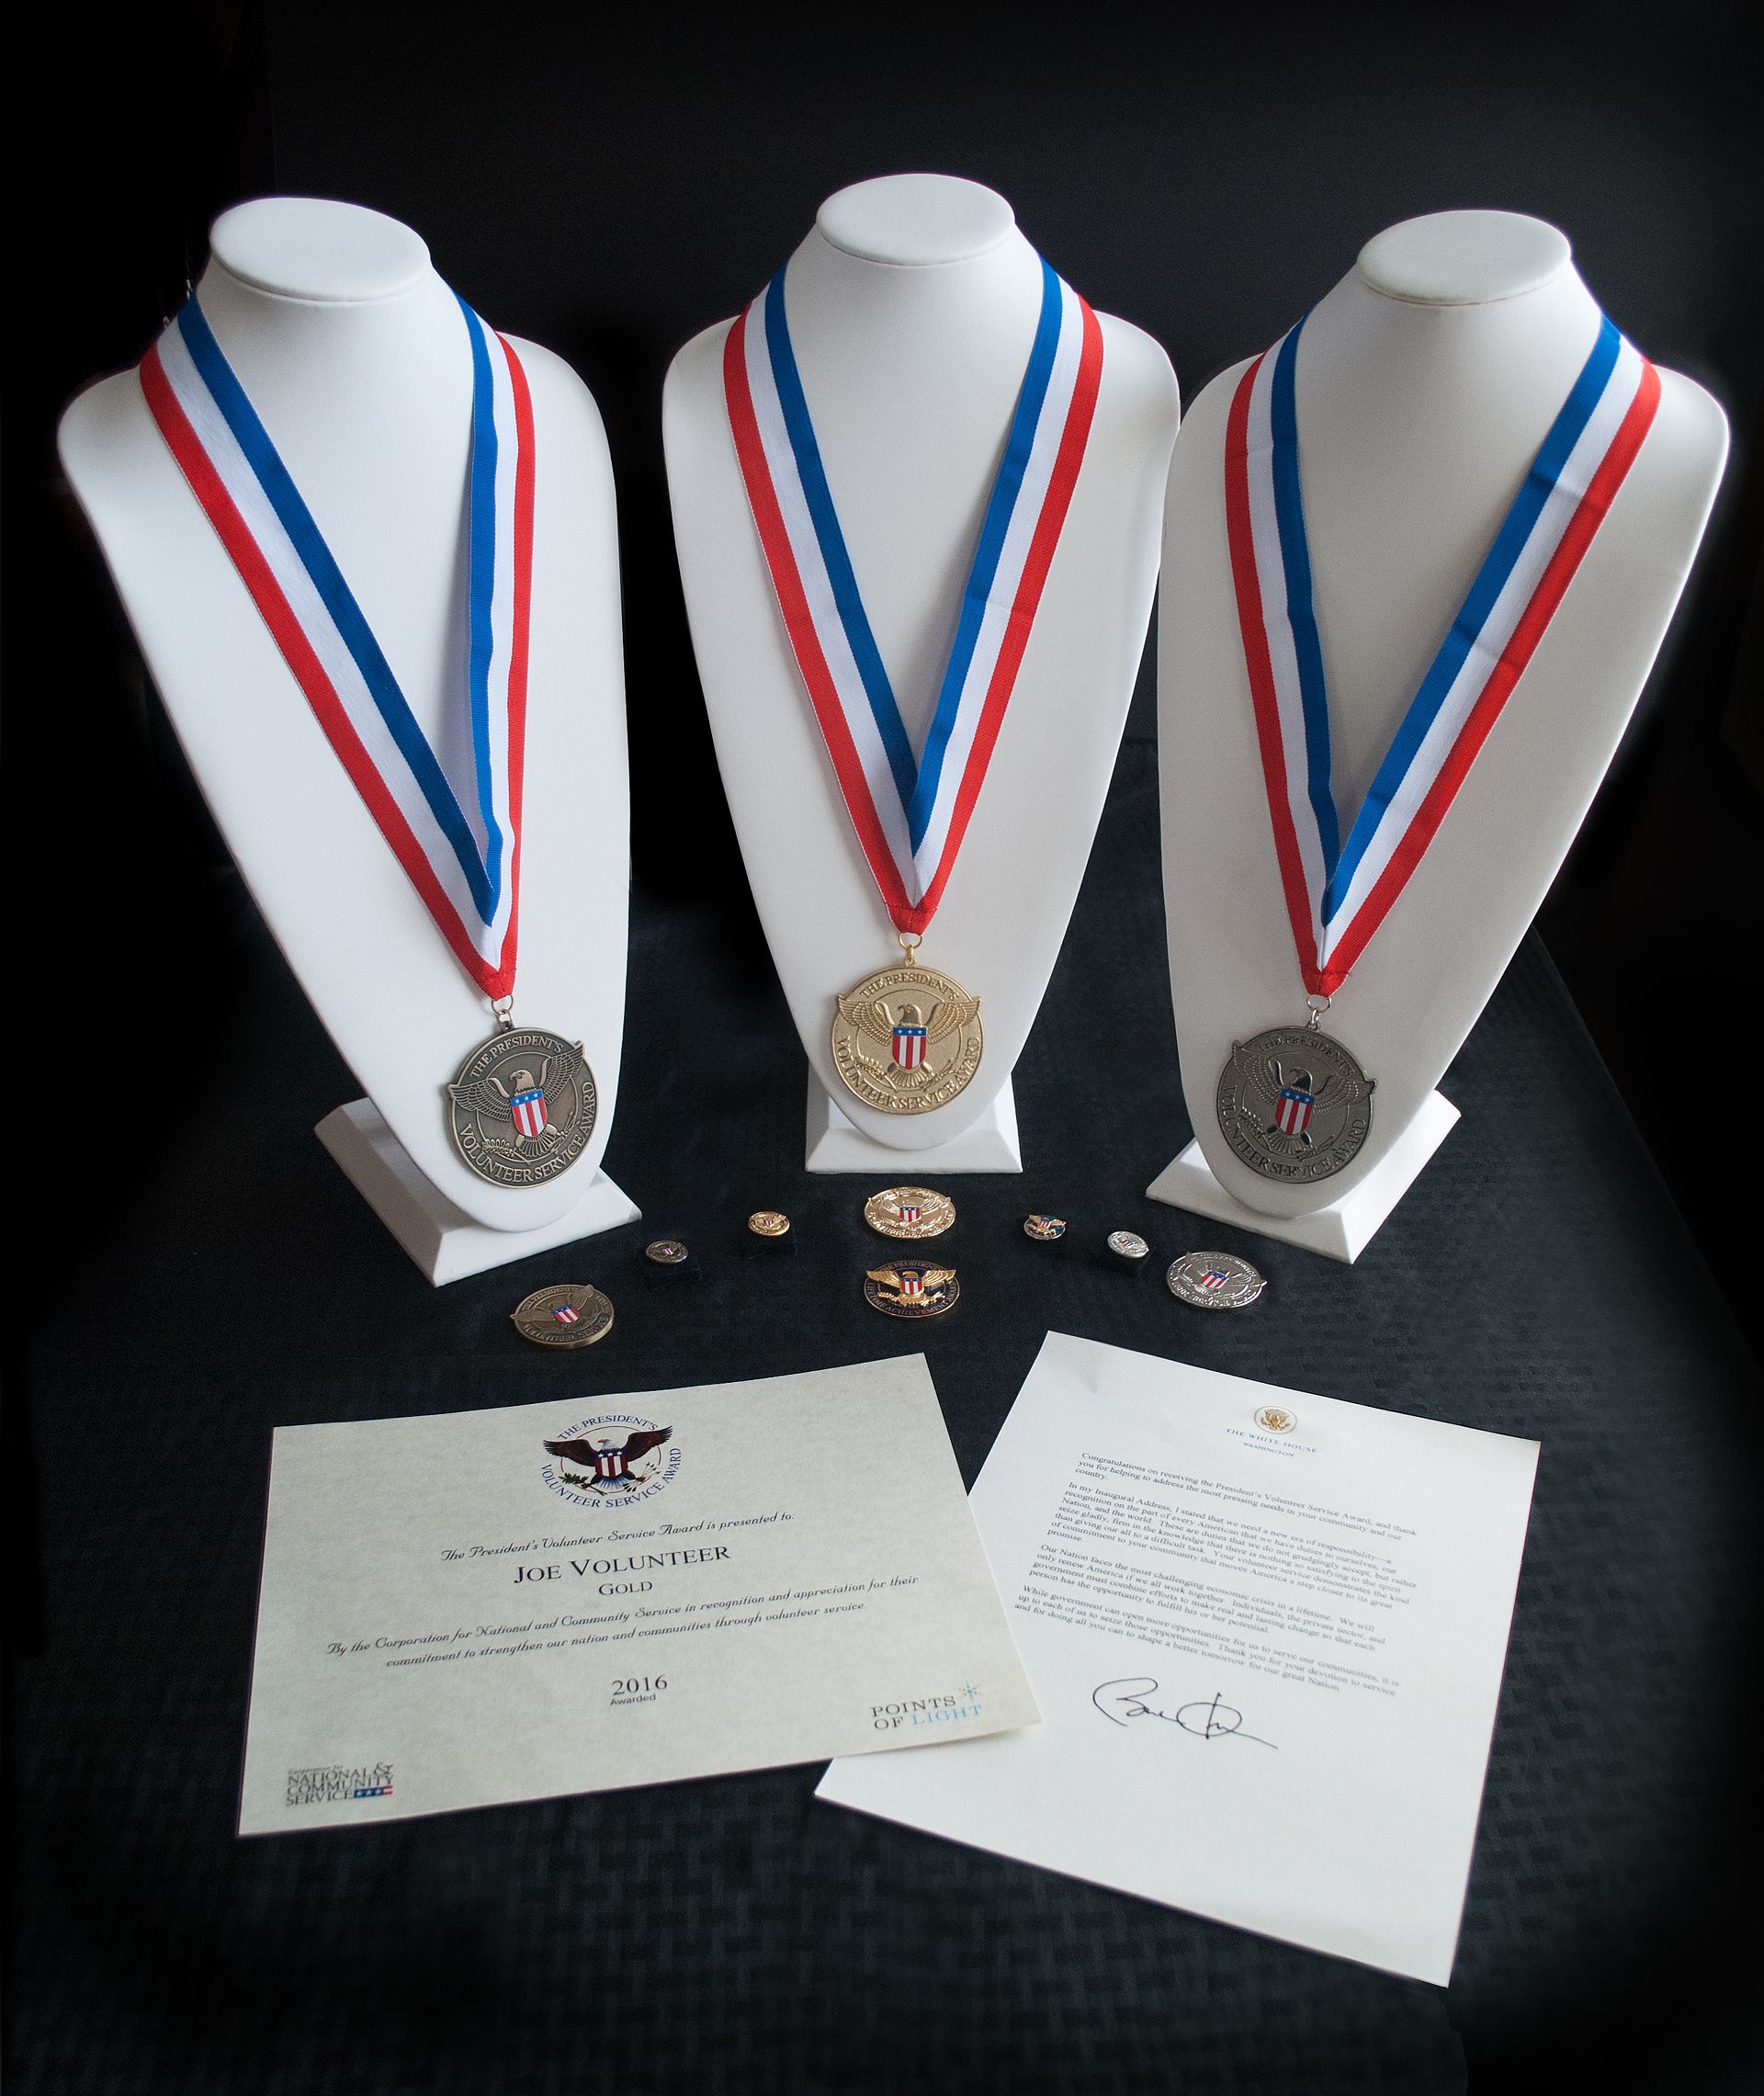 Image courtesy: PVSA website (https://presidentialserviceawards.gov/) The PVSA is divided into Gold, Silver and Bronze awards, depending on the total volunteer hours and age.